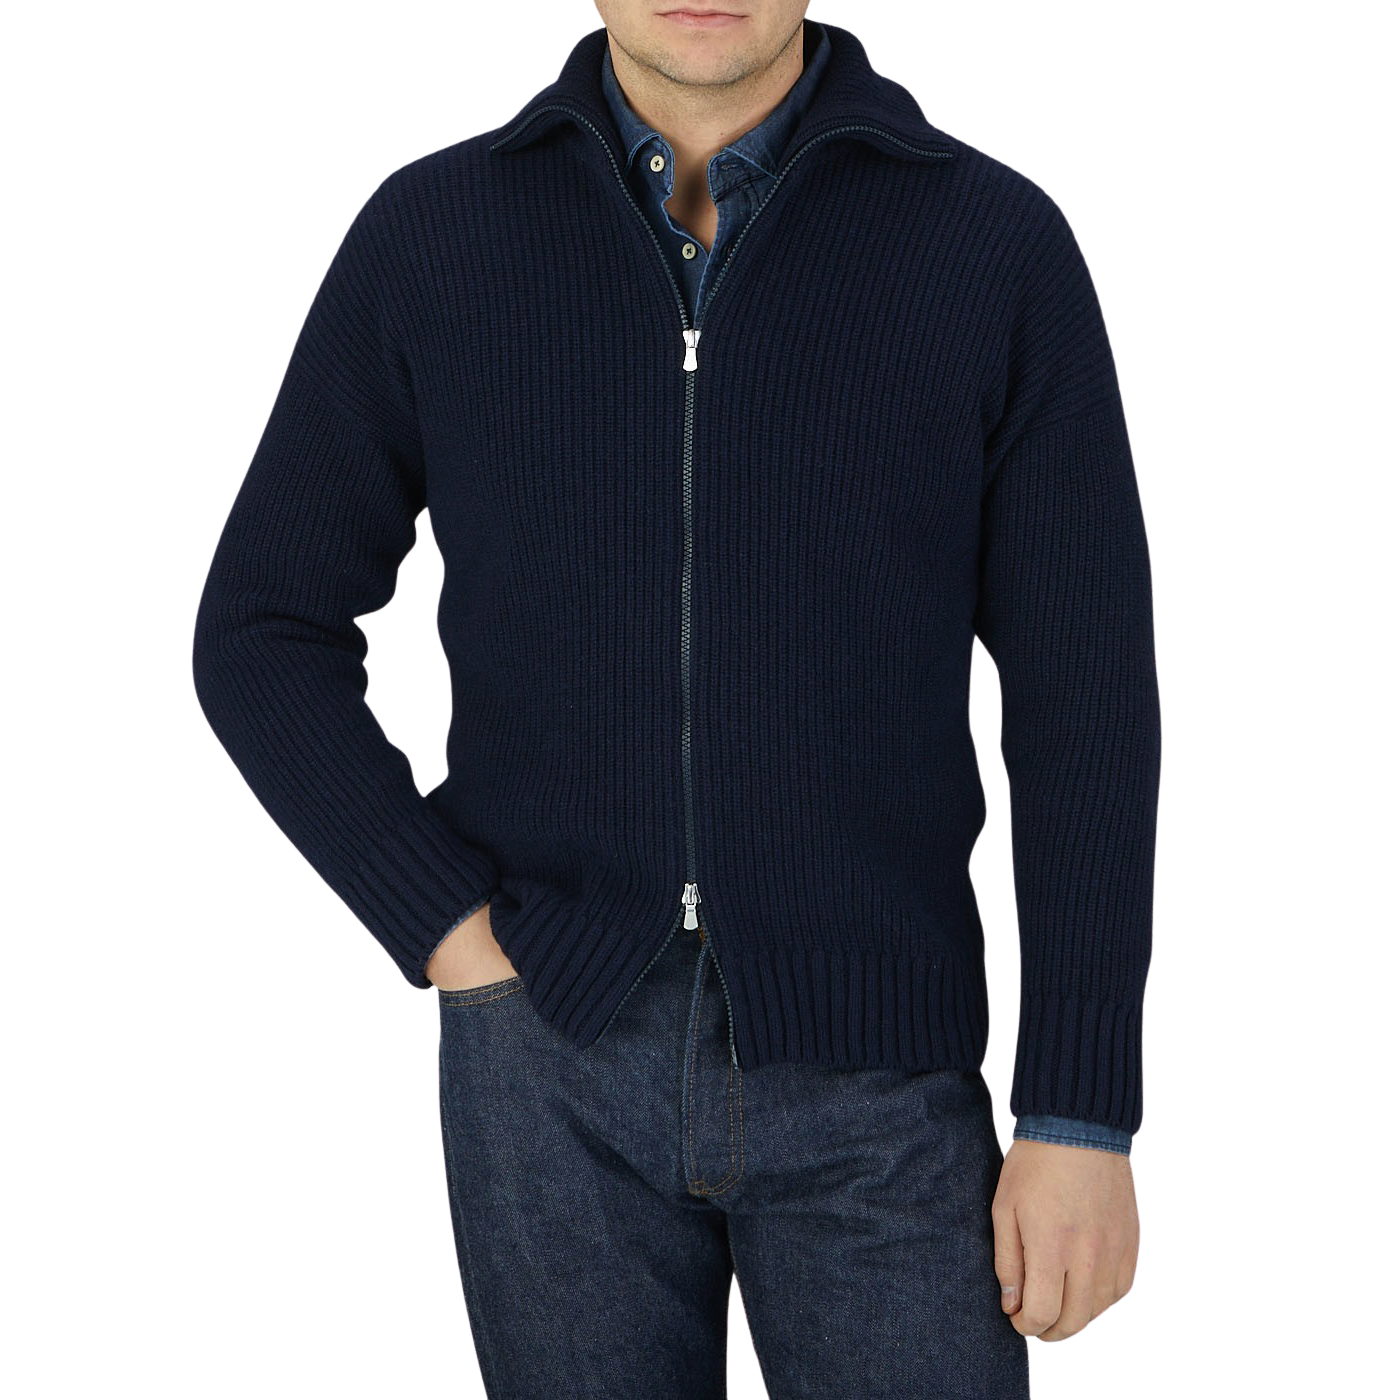 A man wearing a Gran Sasso Navy Blue Eco Cashmere Funnel Neck Cardigan and jeans.